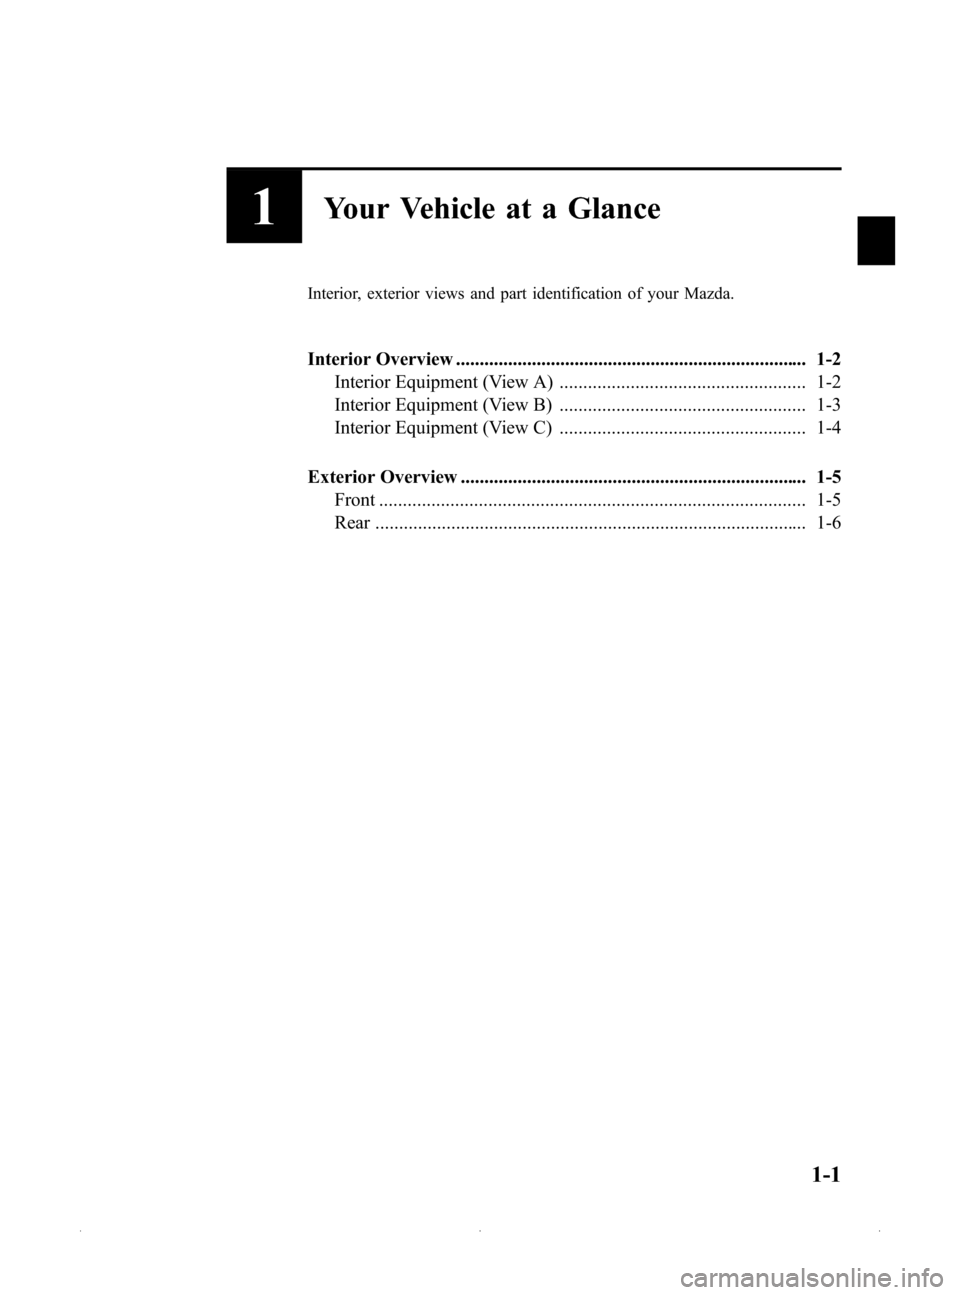 MAZDA MODEL MX-5 PRHT 2015  Owners Manual (in English) Black plate (7,1)
1Your Vehicle at a Glance
Interior, exterior views and part identification of your Mazda.
Interior Overview ..........................................................................